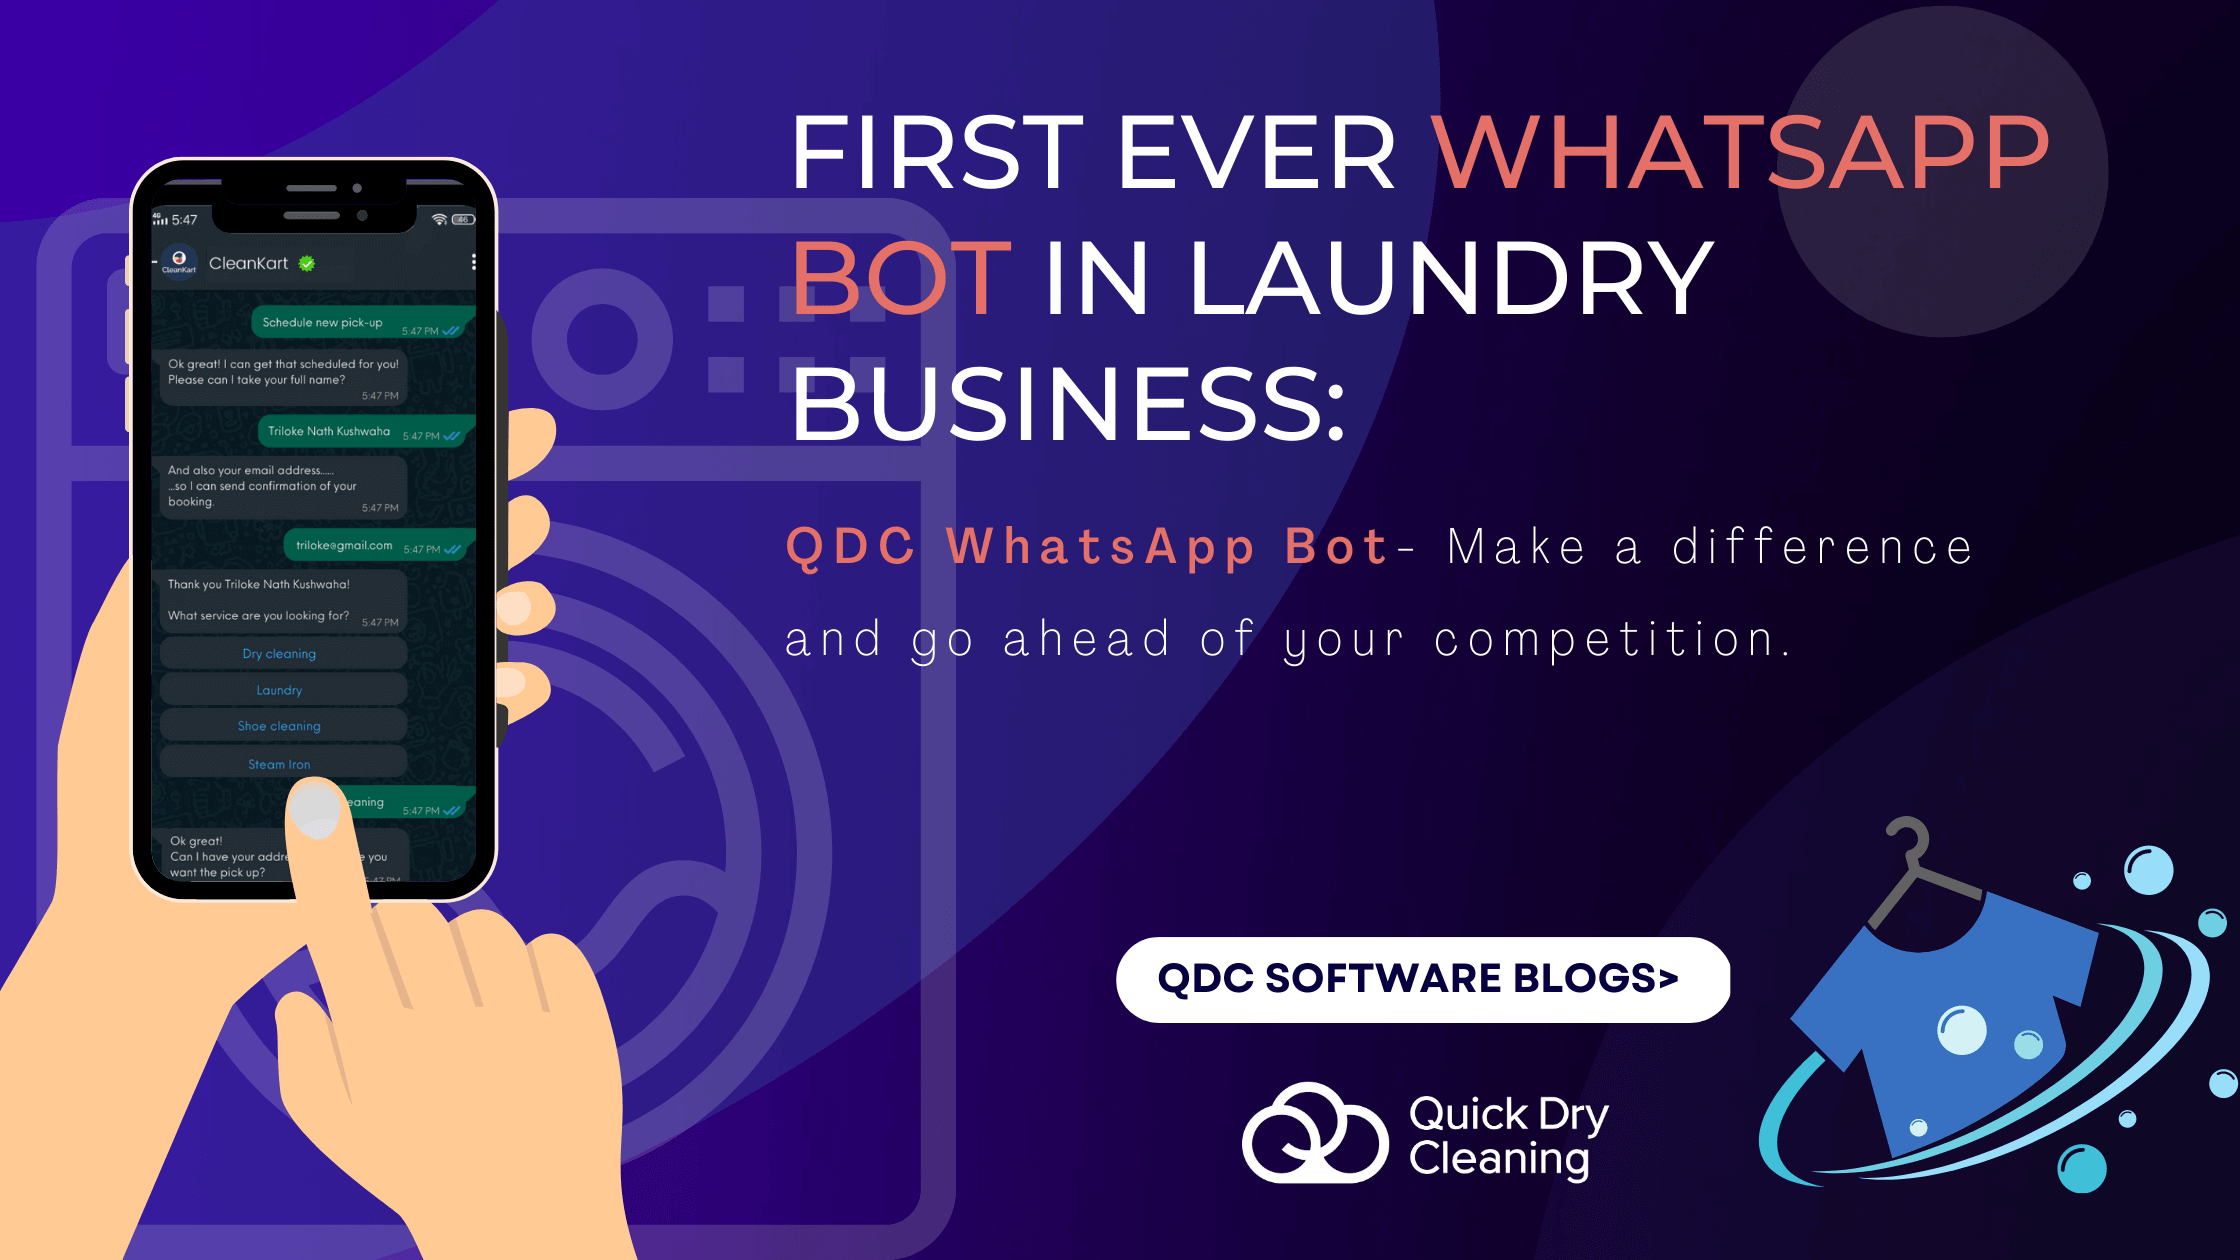 First ever WhatsApp Bot in laundry business